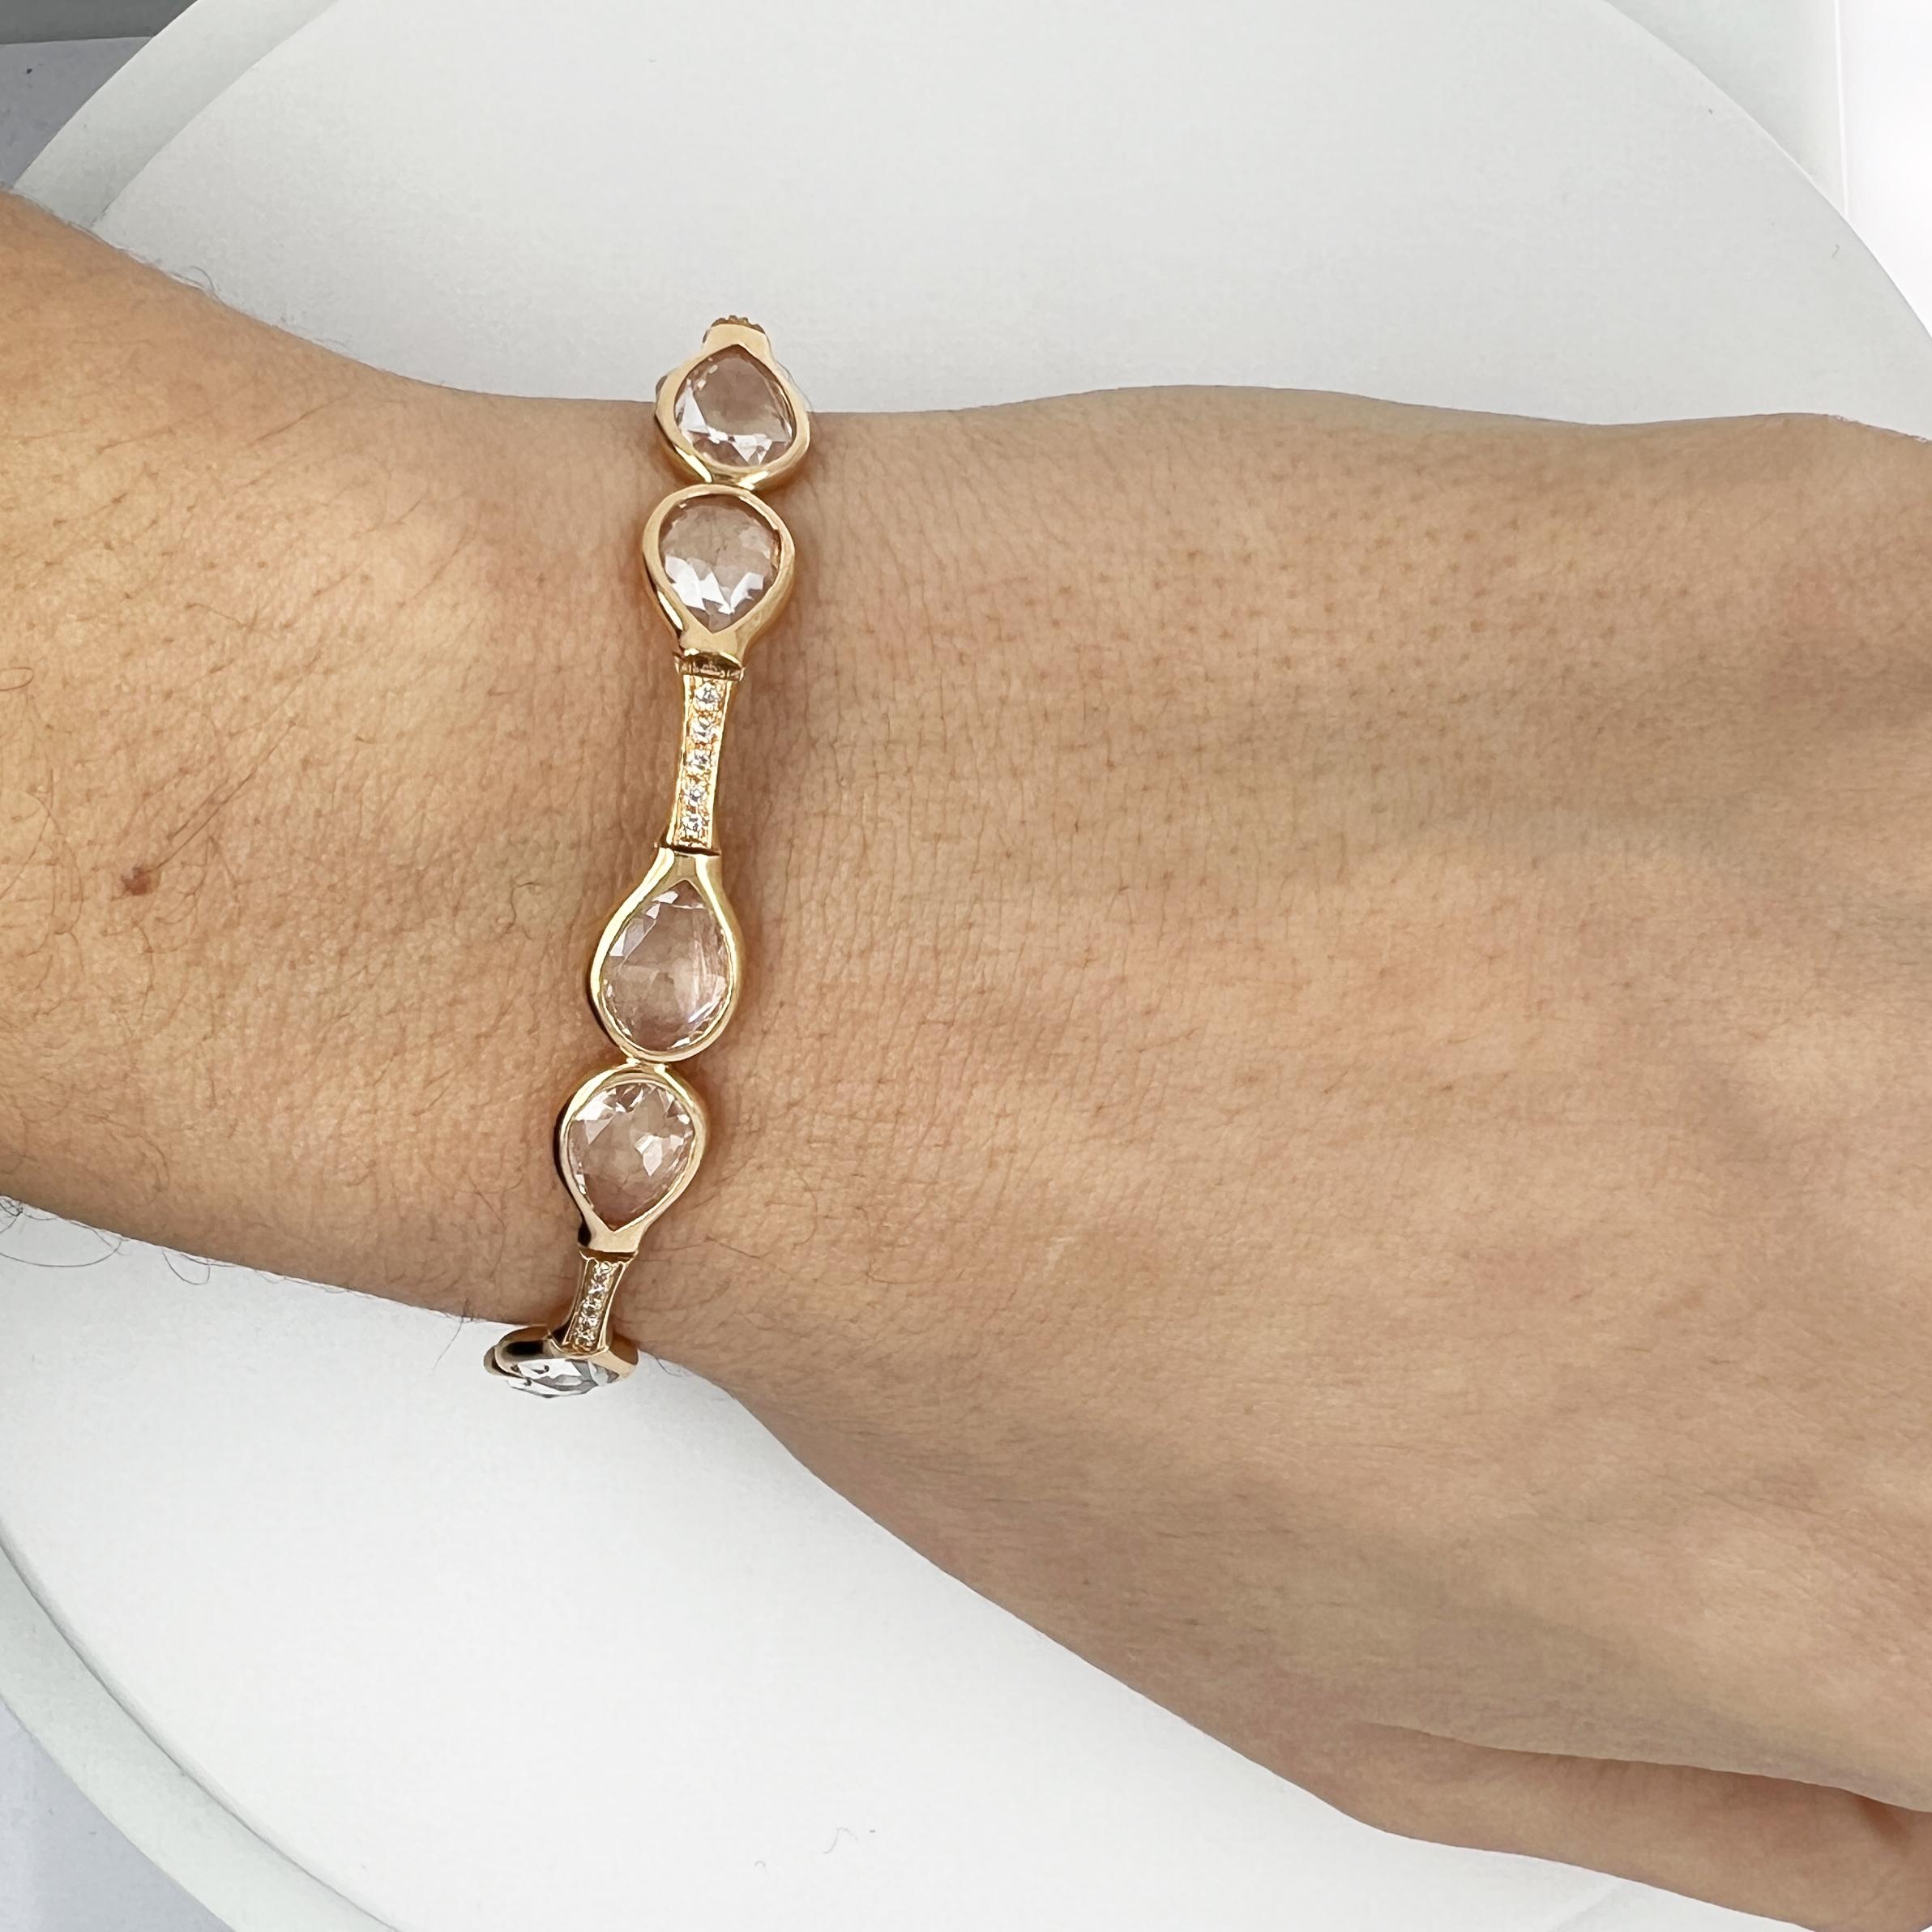 Brilliant Cut Bracelet in 18k rose gold with Diamonds and rock crystal drops For Sale